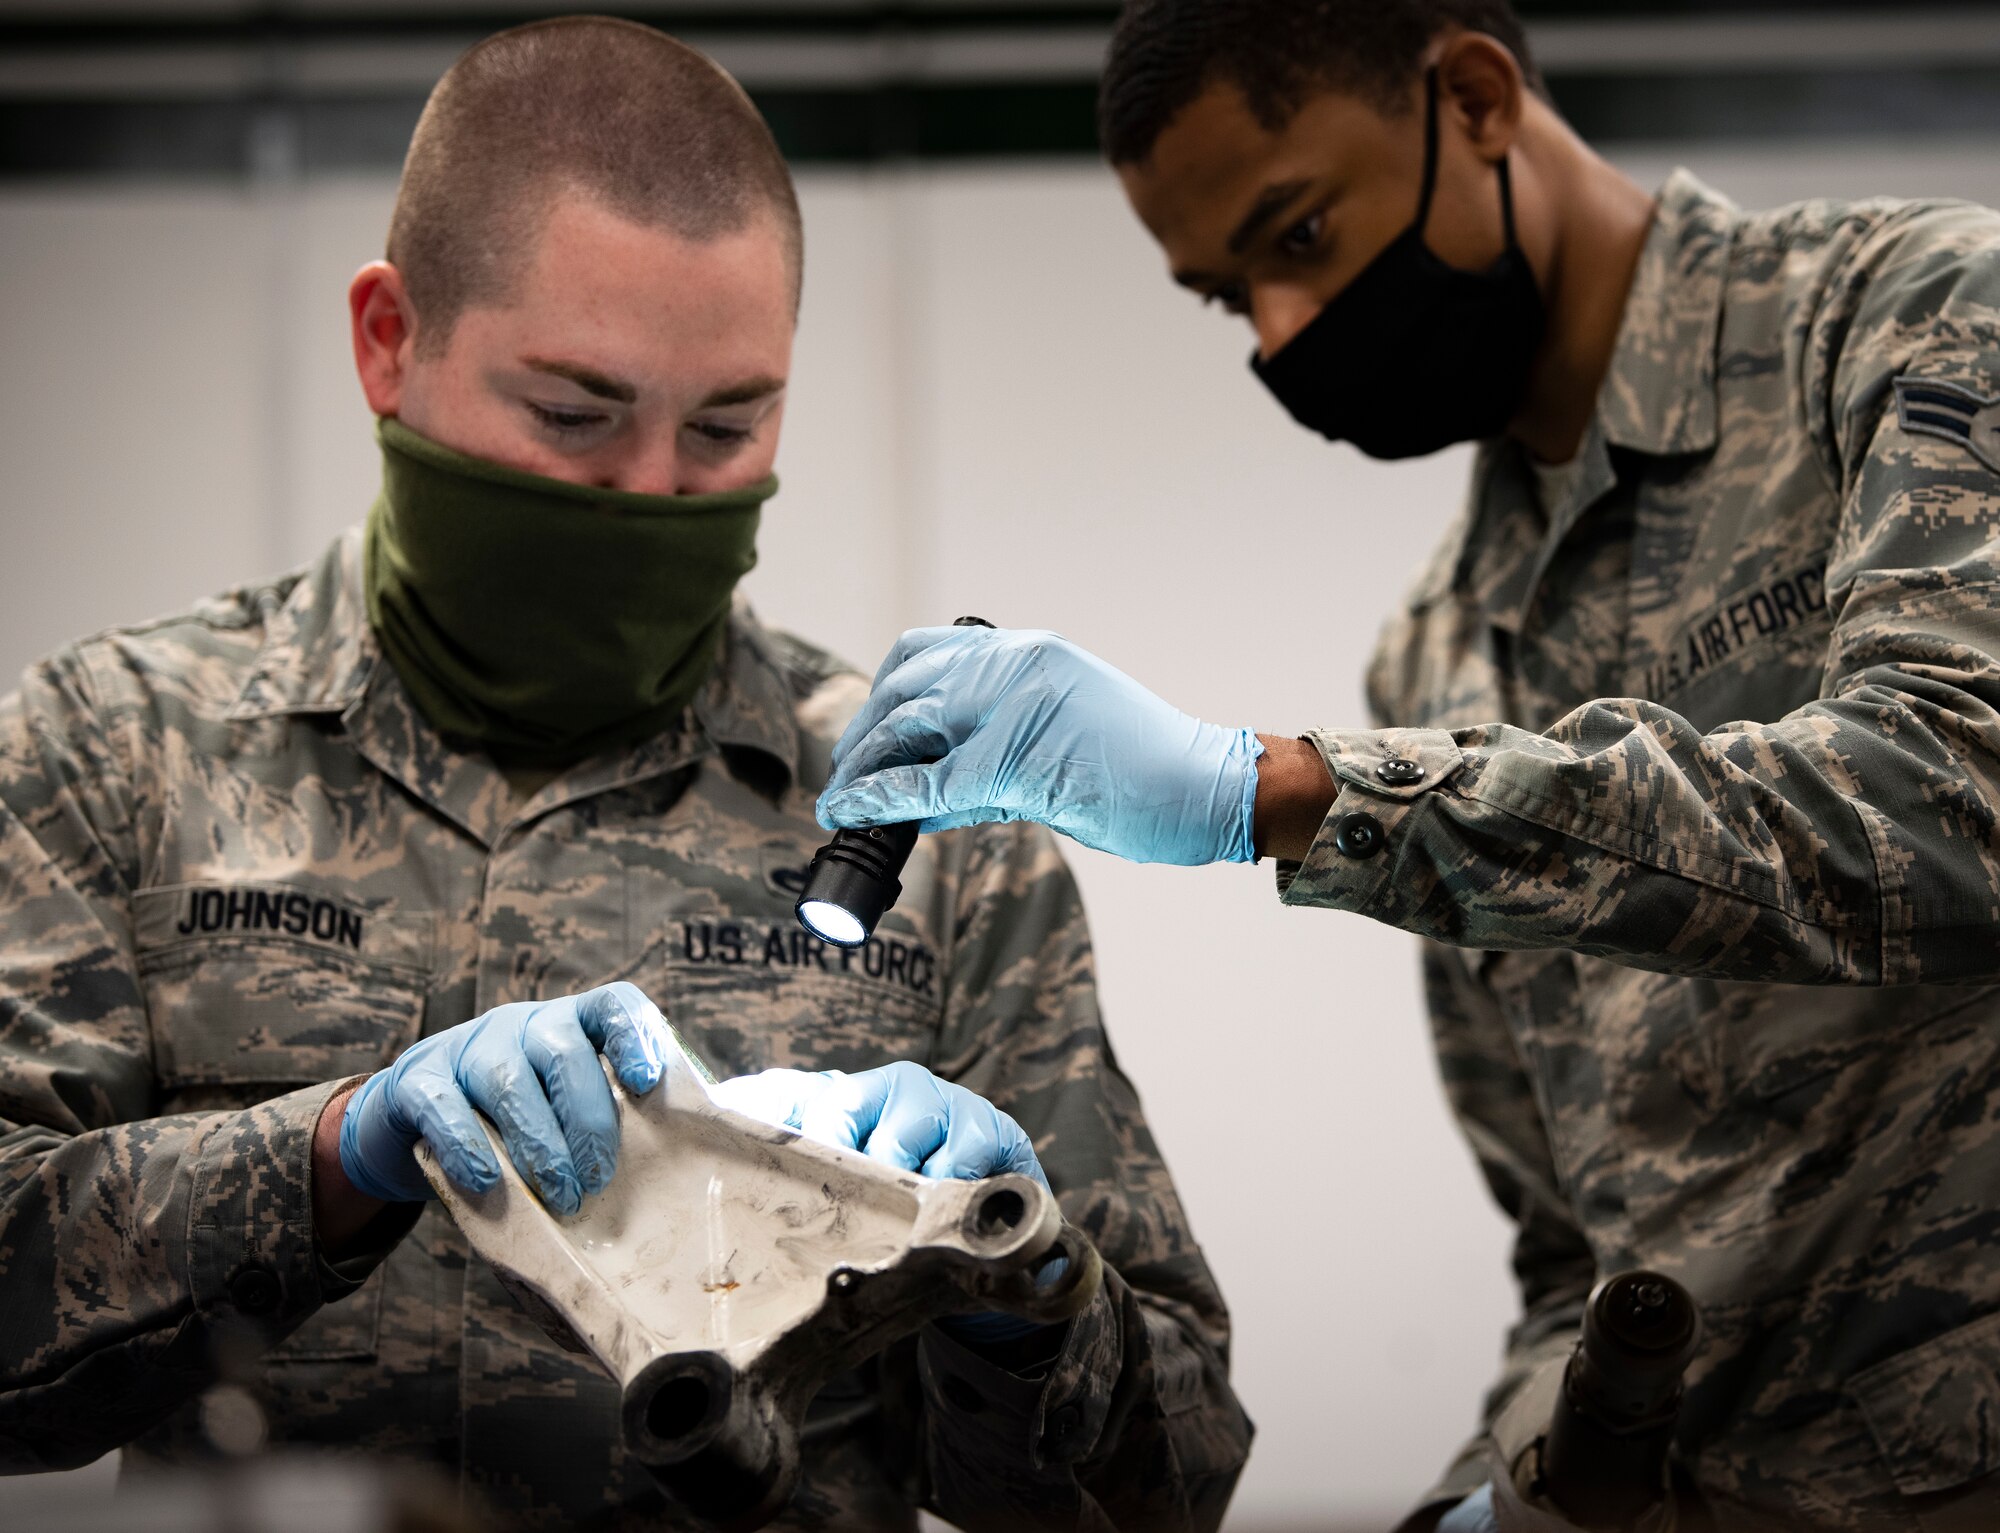 Hydraulic systems Airmen assigned to the 48th Maintenance Group inspect parts while wearing personal protective equipment to combat the spread of COVID-19 at Royal Air Force Lakenheath, England, April 30, 2020. The hydraulics shop is one of many units that helped the 48th MXG earn the 2019 USAFE-AFAFRICA Clements McMullen Memorial Daedalian Weapon System Maintenance Trophy. (U.S. Air Force photo by Airman 1st Class Madeline Herzog)